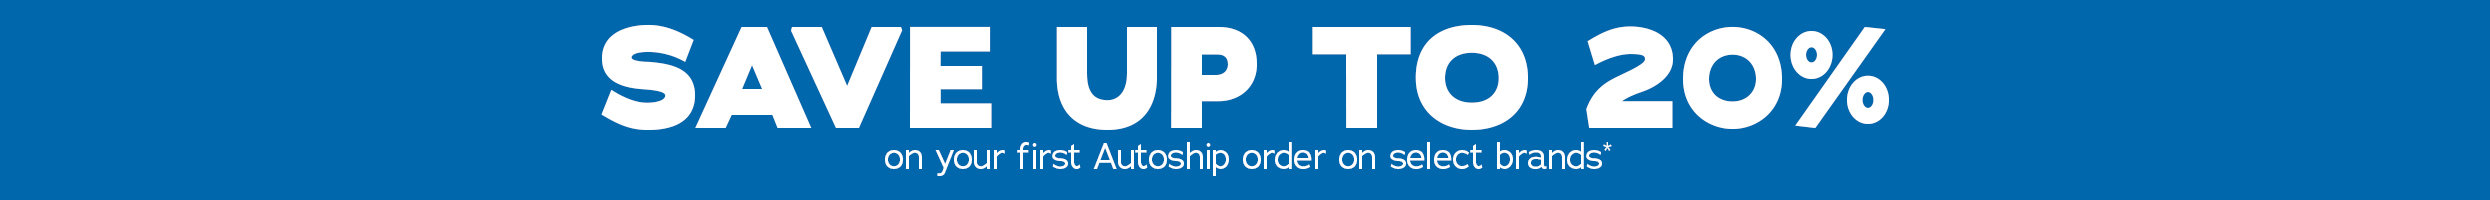 Save up to 20% on your first Autoship order on Select Brands*